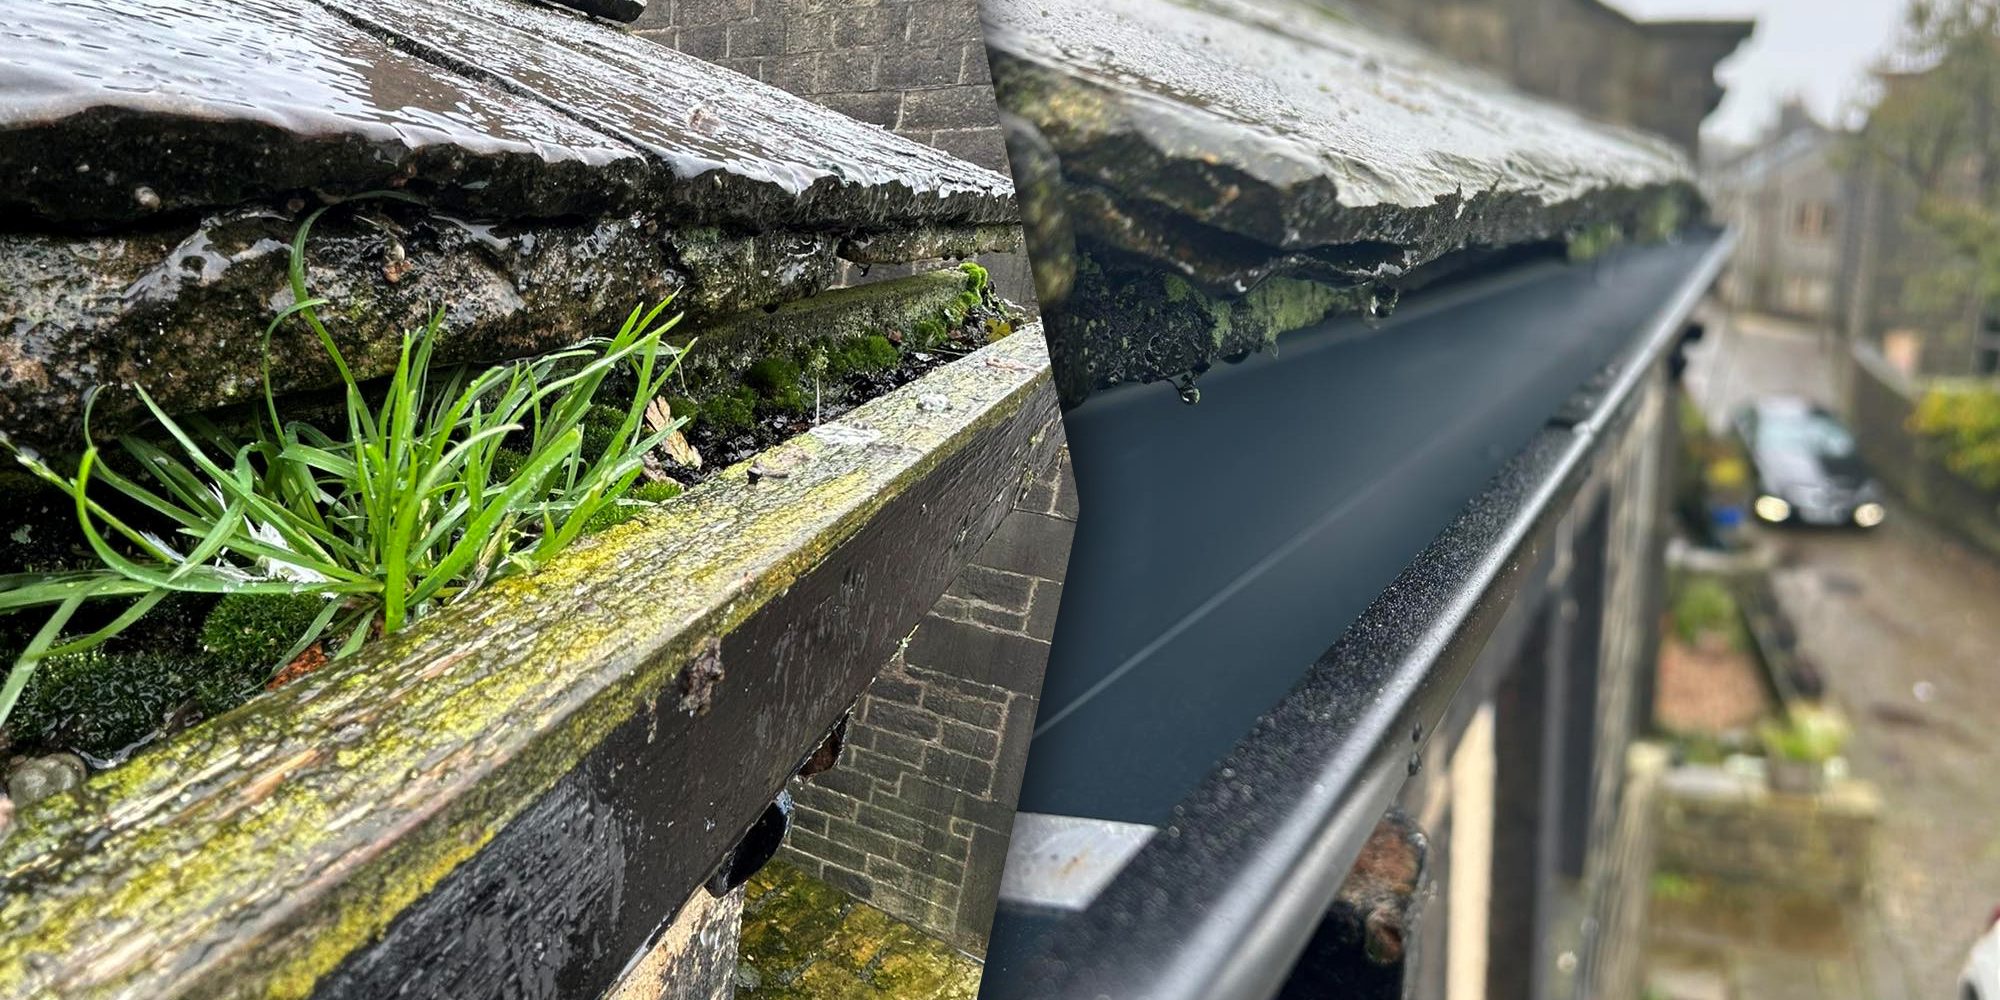 guttering replacement in clitheroe before and after